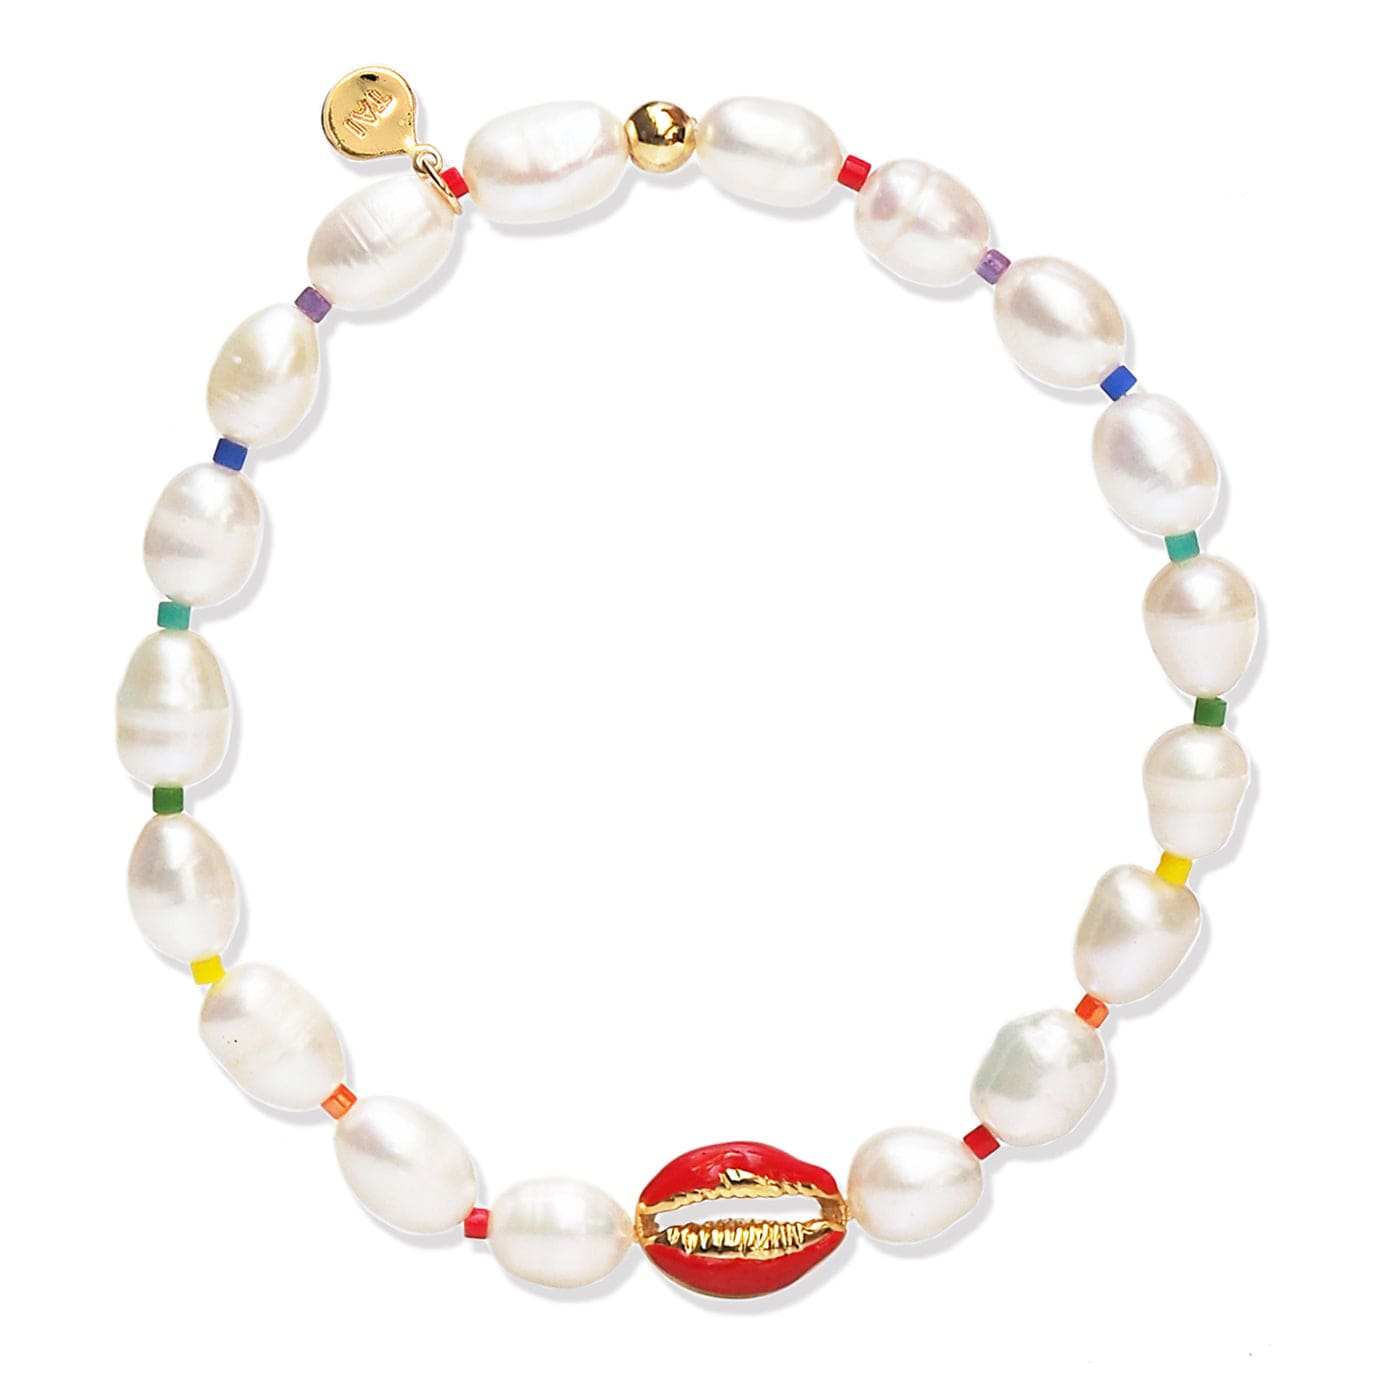 TAI JEWELRY Bracelet Red Handmade Pearl Bracelet With Sea Shell And Rainbow Accents